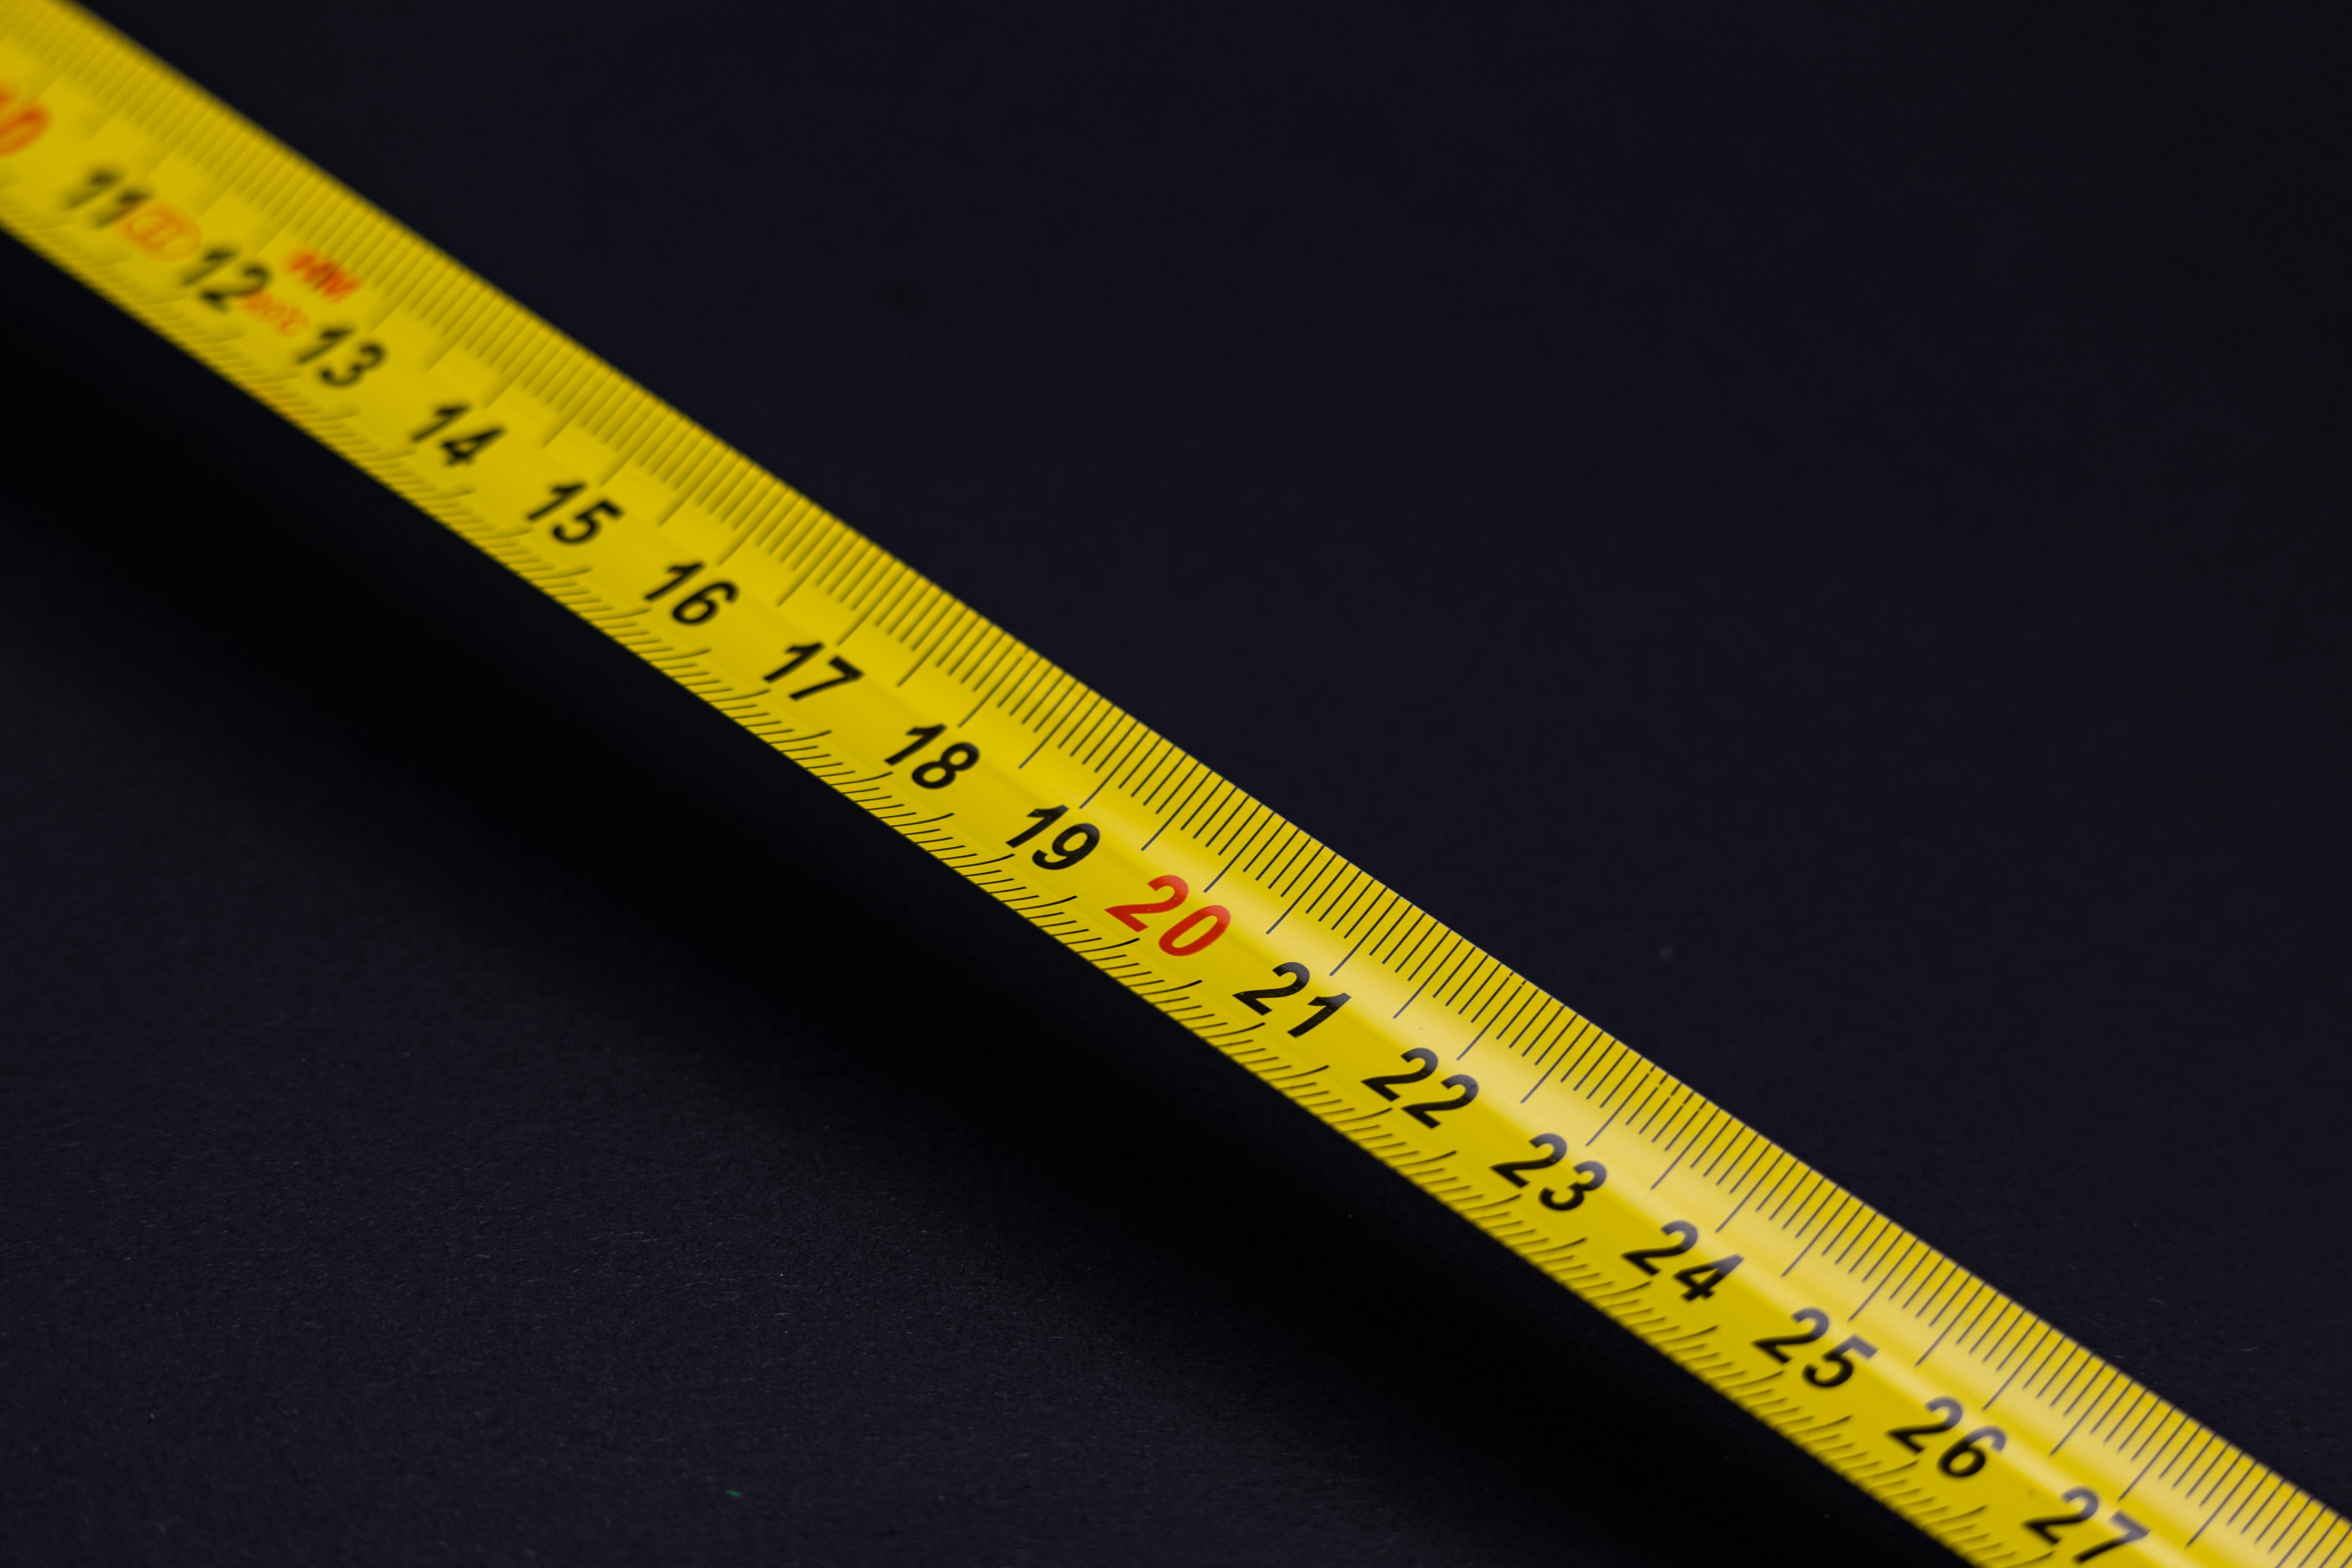 Measuring Tape- English (feet/inches), 25